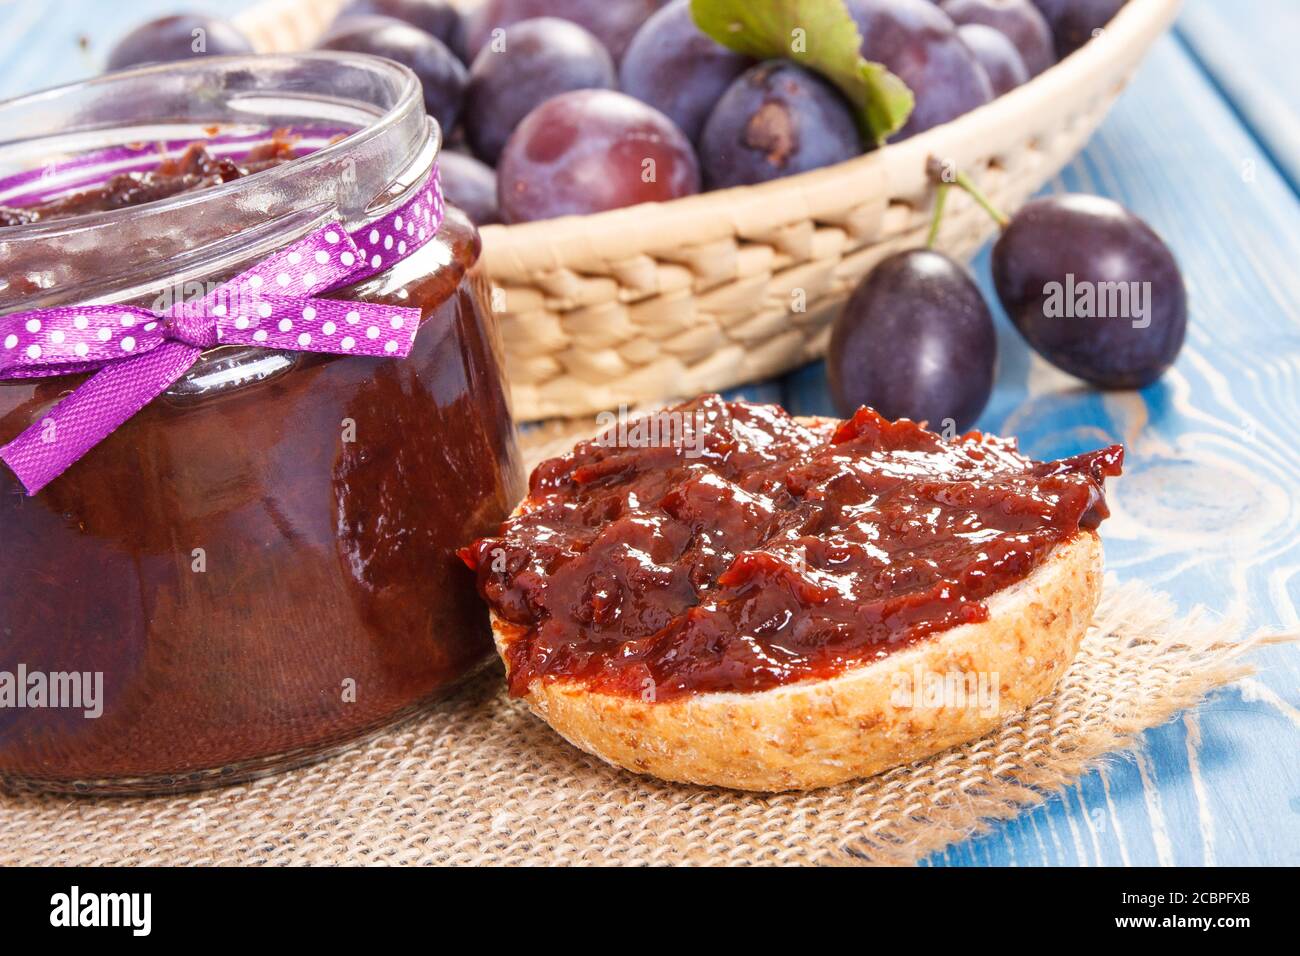 Sandwiches with homemade plum marmalade or jam, concept of healthy sweet snack, breakfast or dessert Stock Photo